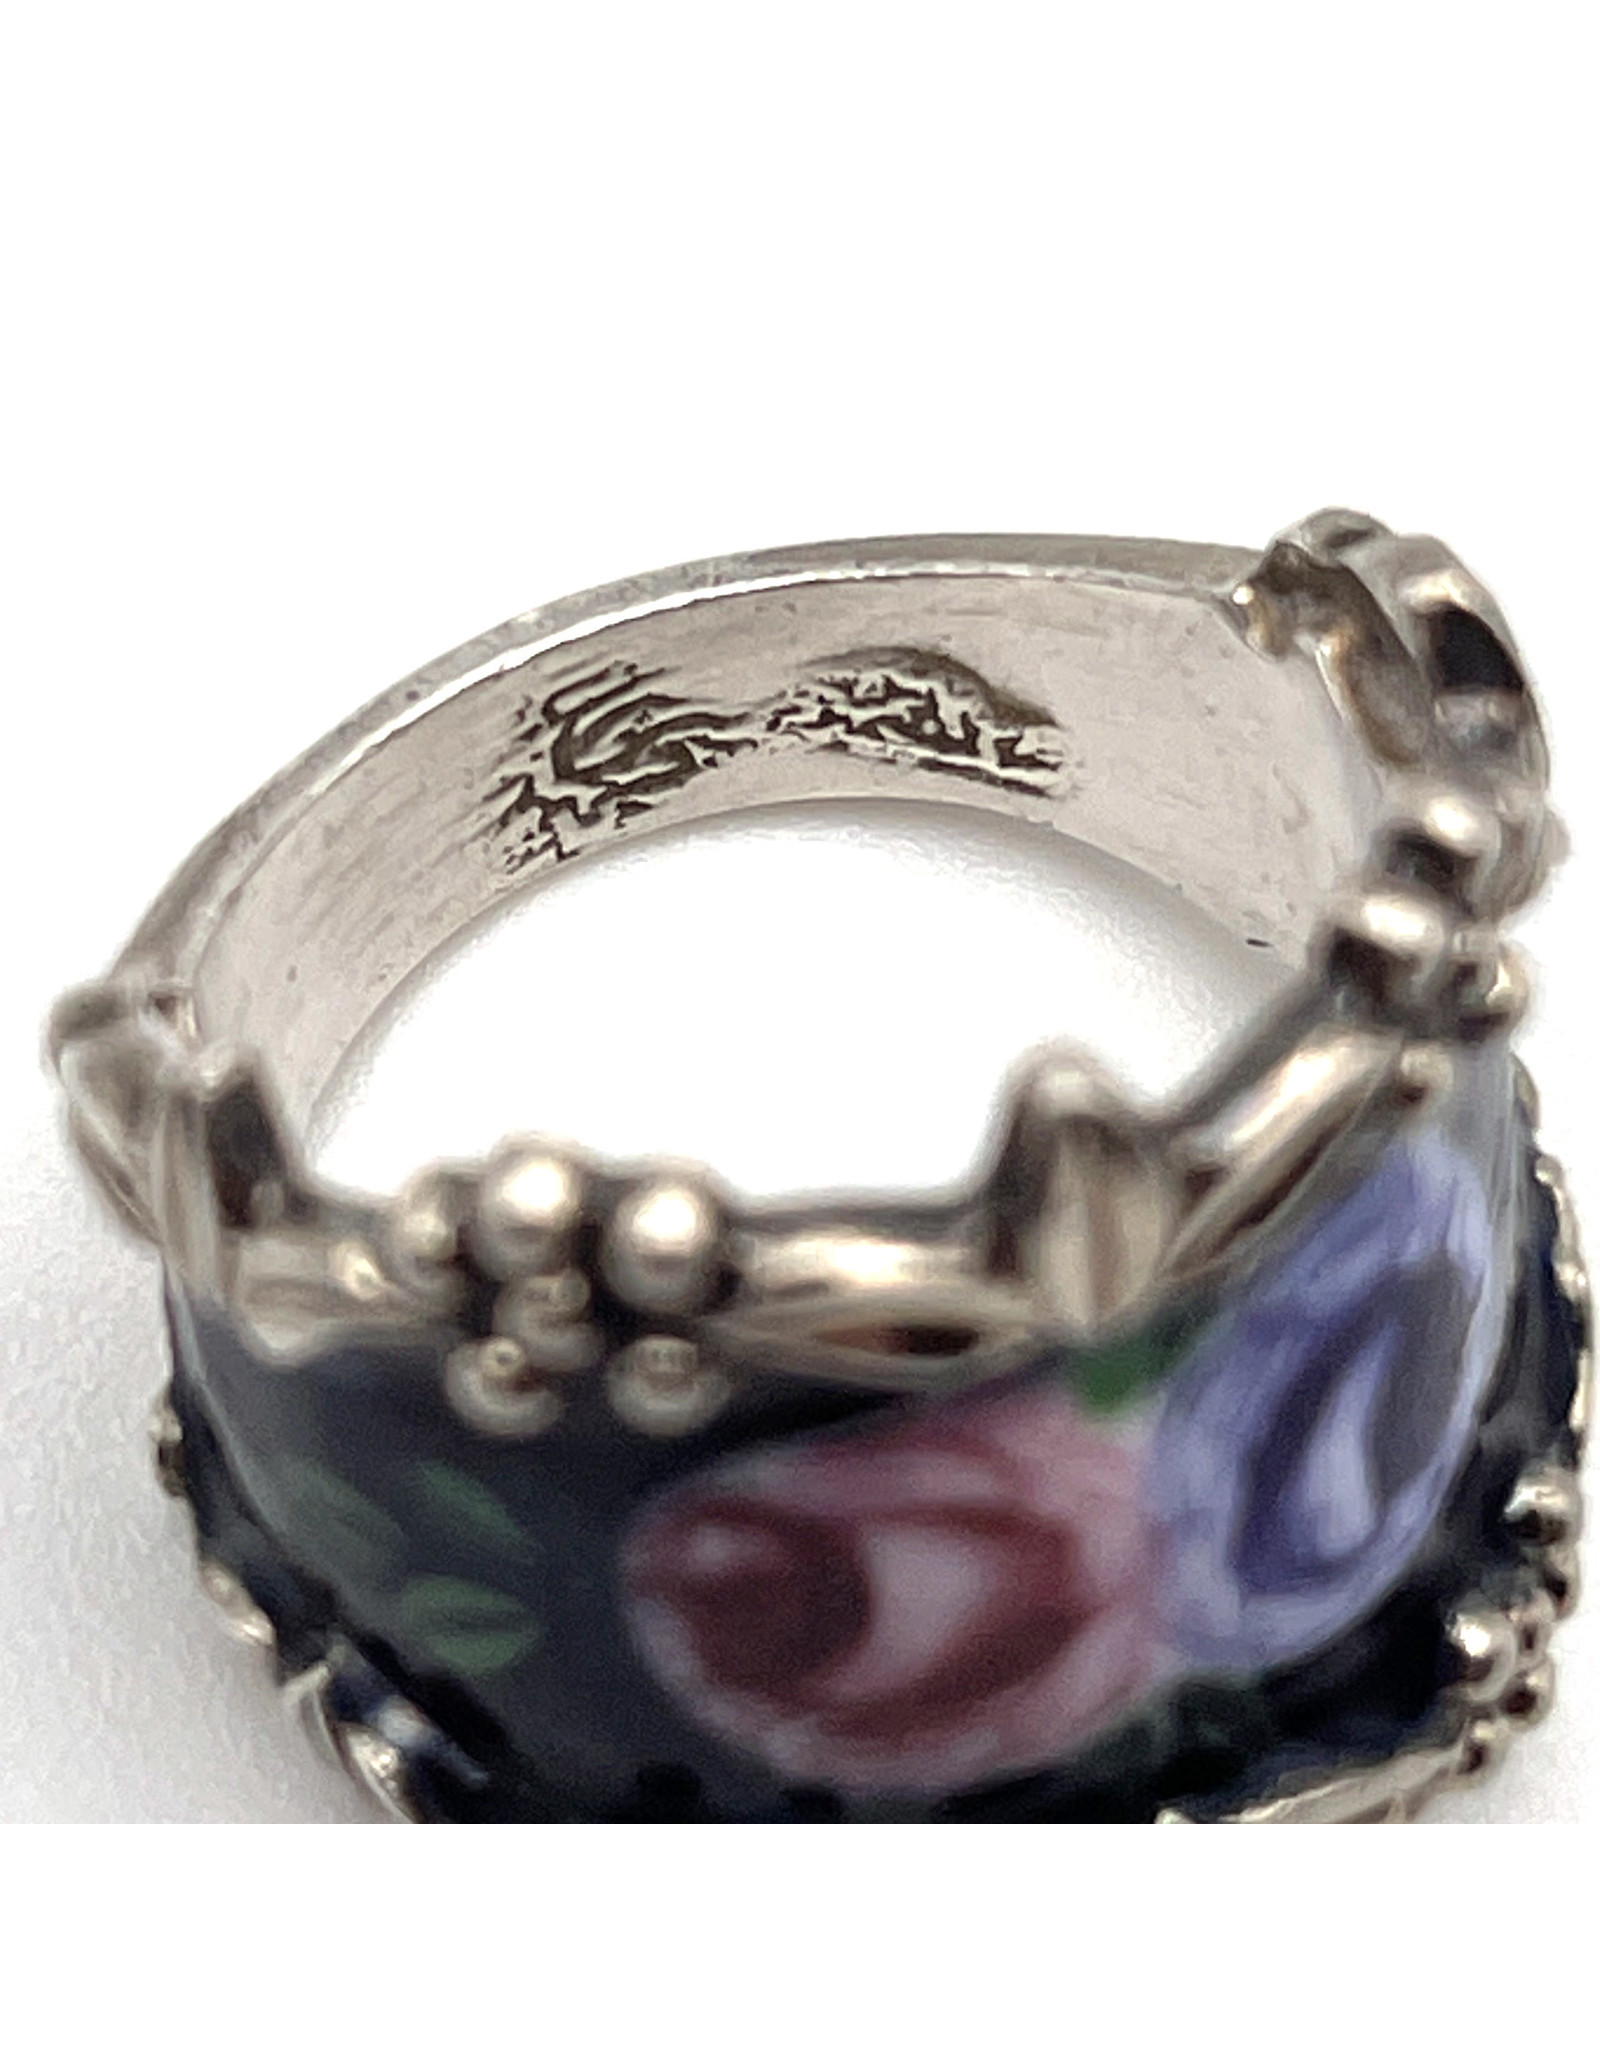 Clark & Coombs Sterling with Pink & Purple Enamel Roses Ring Size 5½